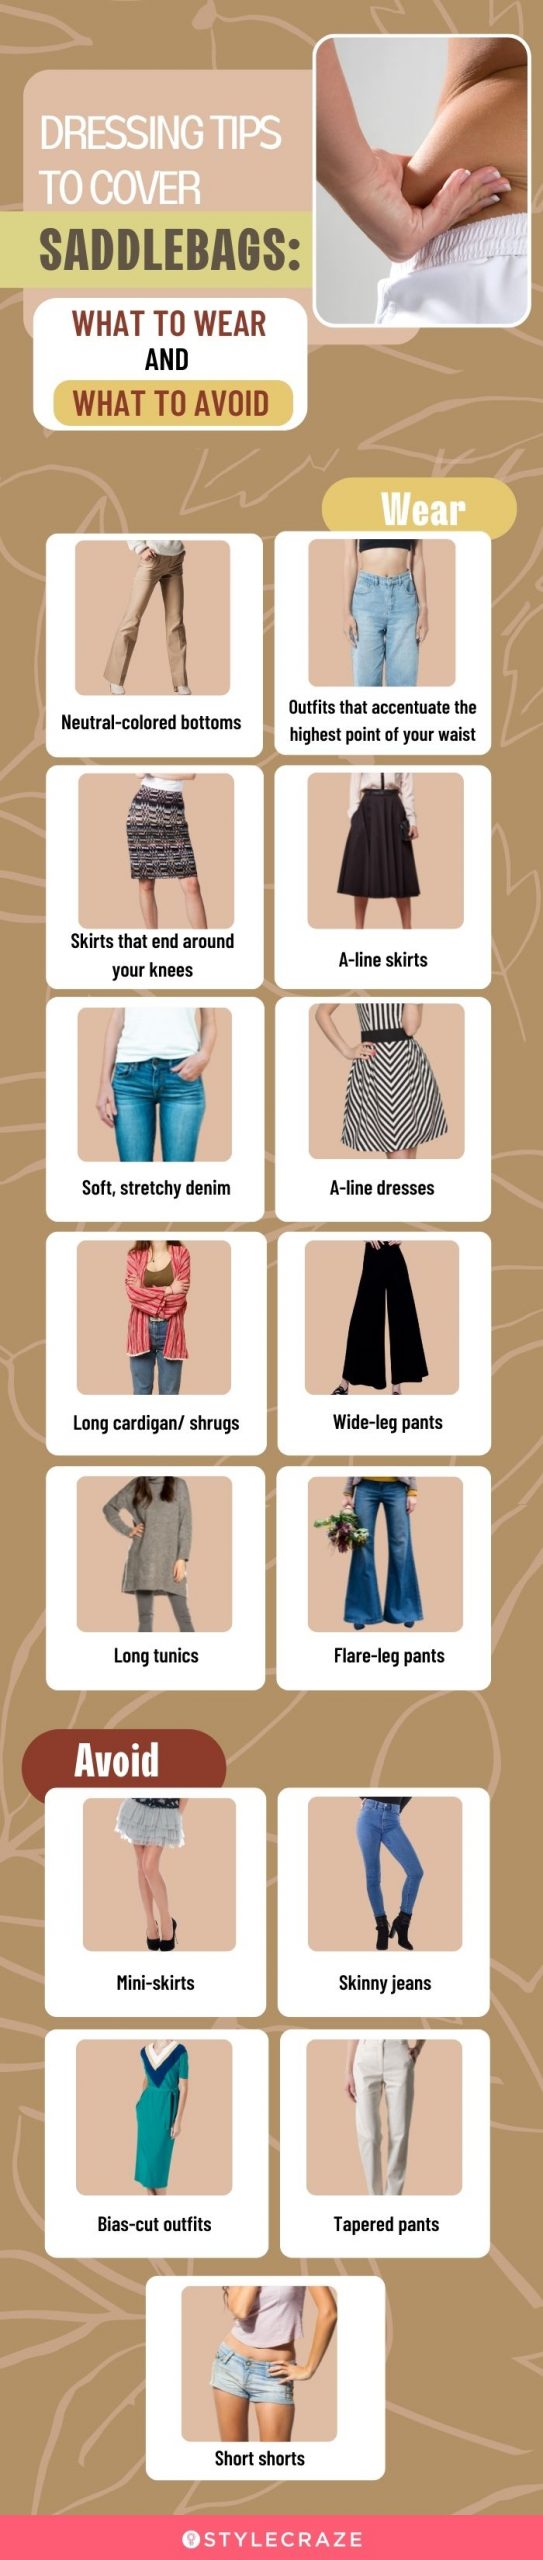 dressing tips to cover saddlebags what to wear and what to avoid [infographic]